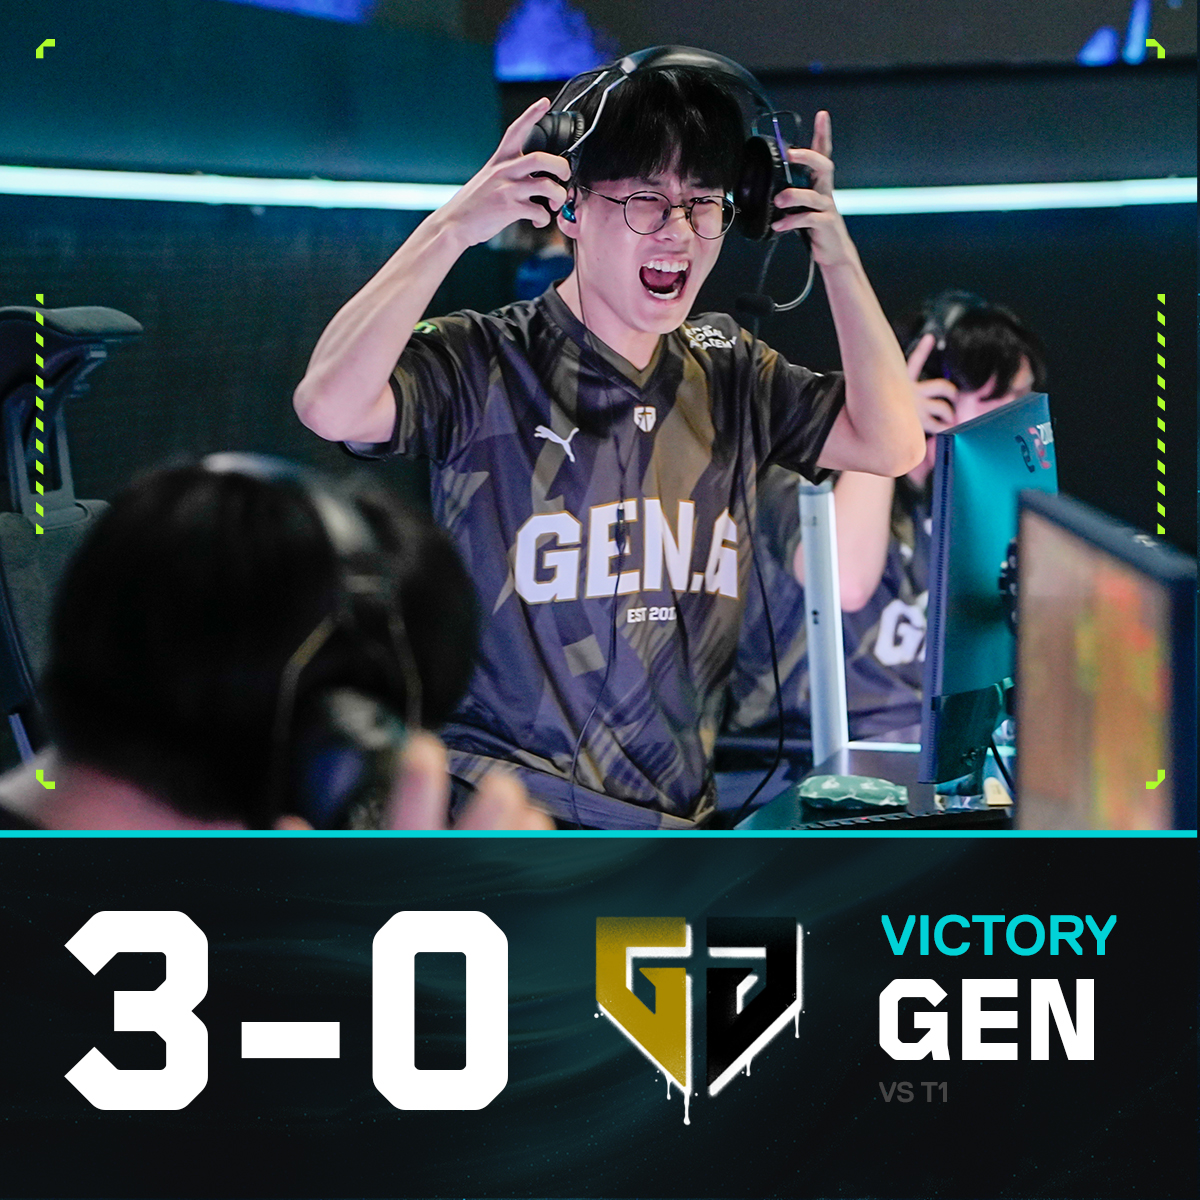 BACK TO BACK TO BACK GRAND FINALS APPEARANCE FOR THE TIGER NATION 🐯 

Gen.G dismantles T1 in 3 maps and advances to the Finals after a 3-0 sweep!

#VCTPacific